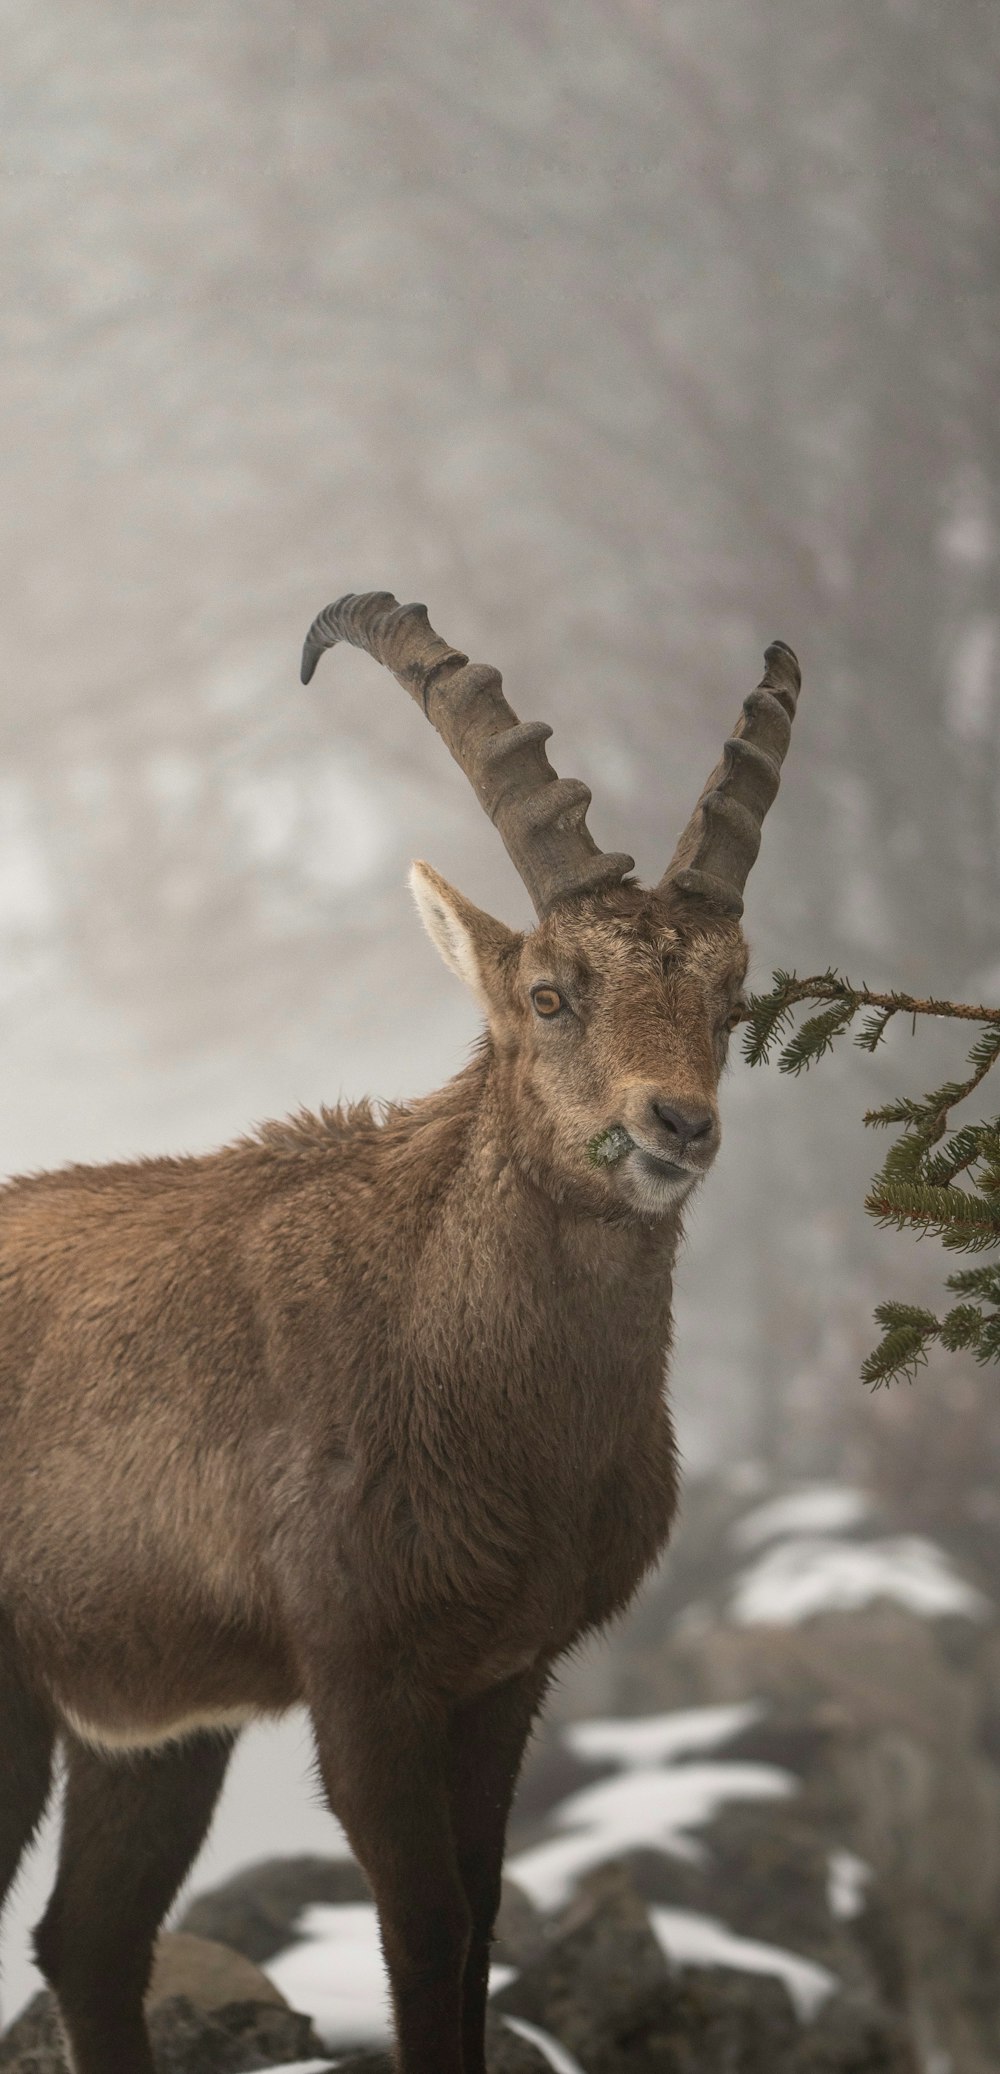 a horned animal standing on top of a snow covered ground